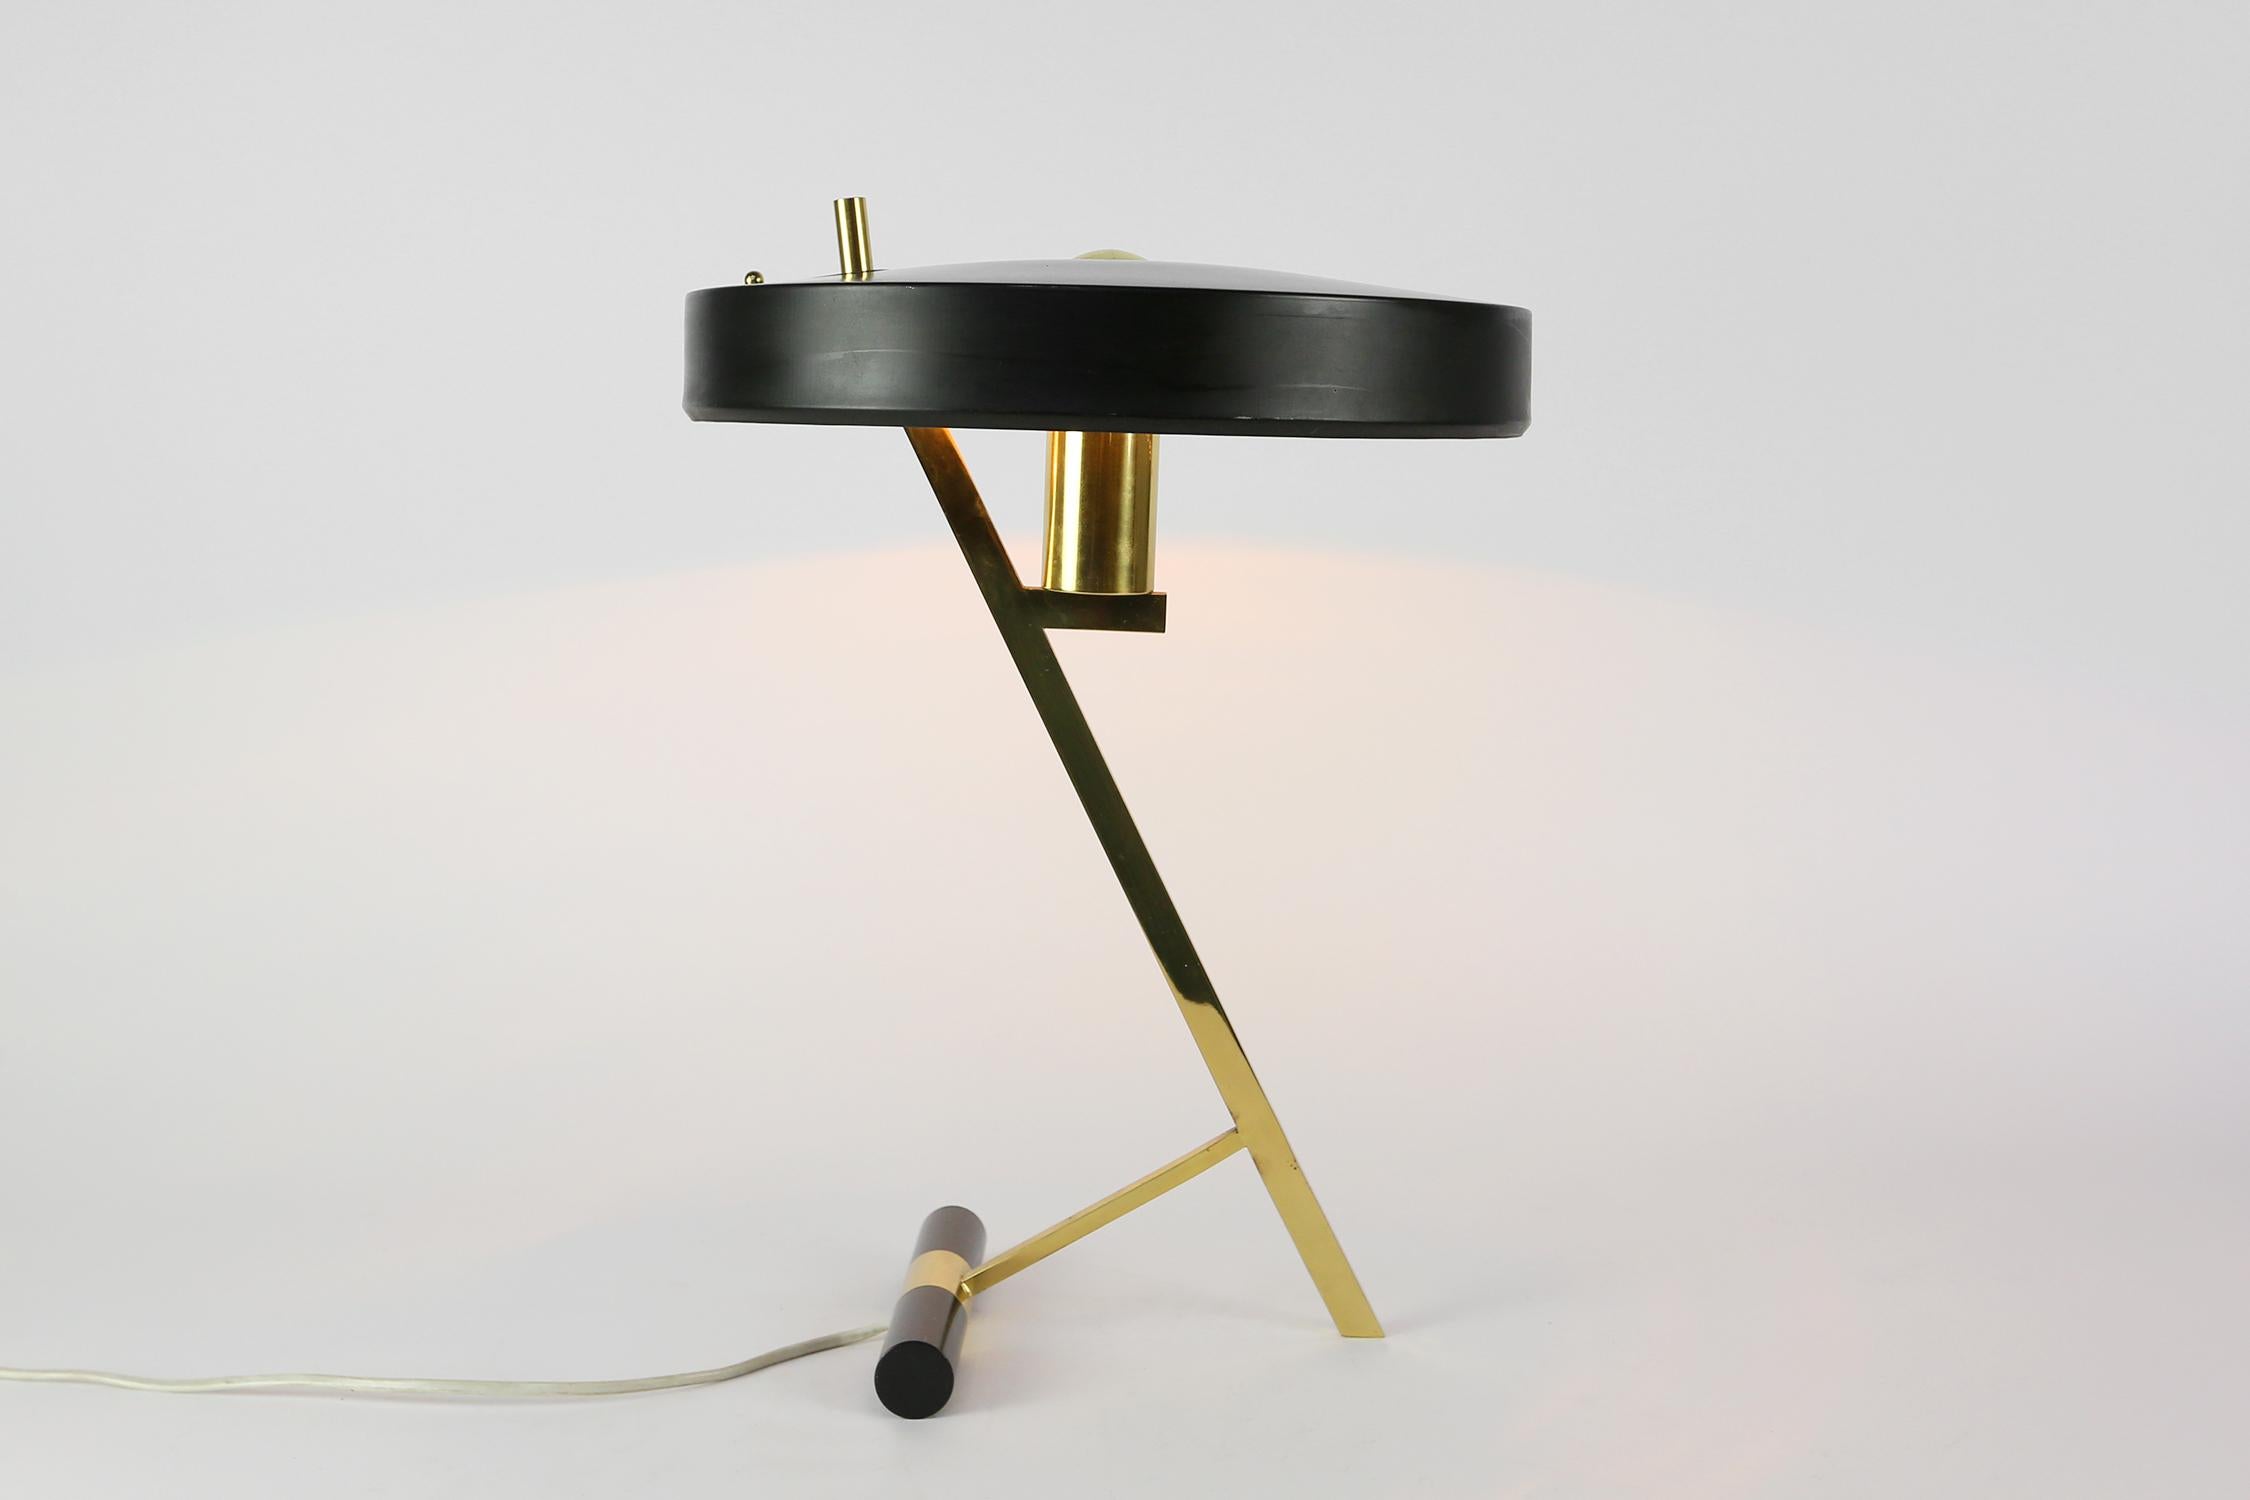 Rare Z-shaped desk lamp designed by former head-designer at Philips Netherlands Louis Kalff. Beautifully designed brass Z-frame and still has the original brass manufacturer tag on the shade. 
Design from 1955. With the original brass Philips